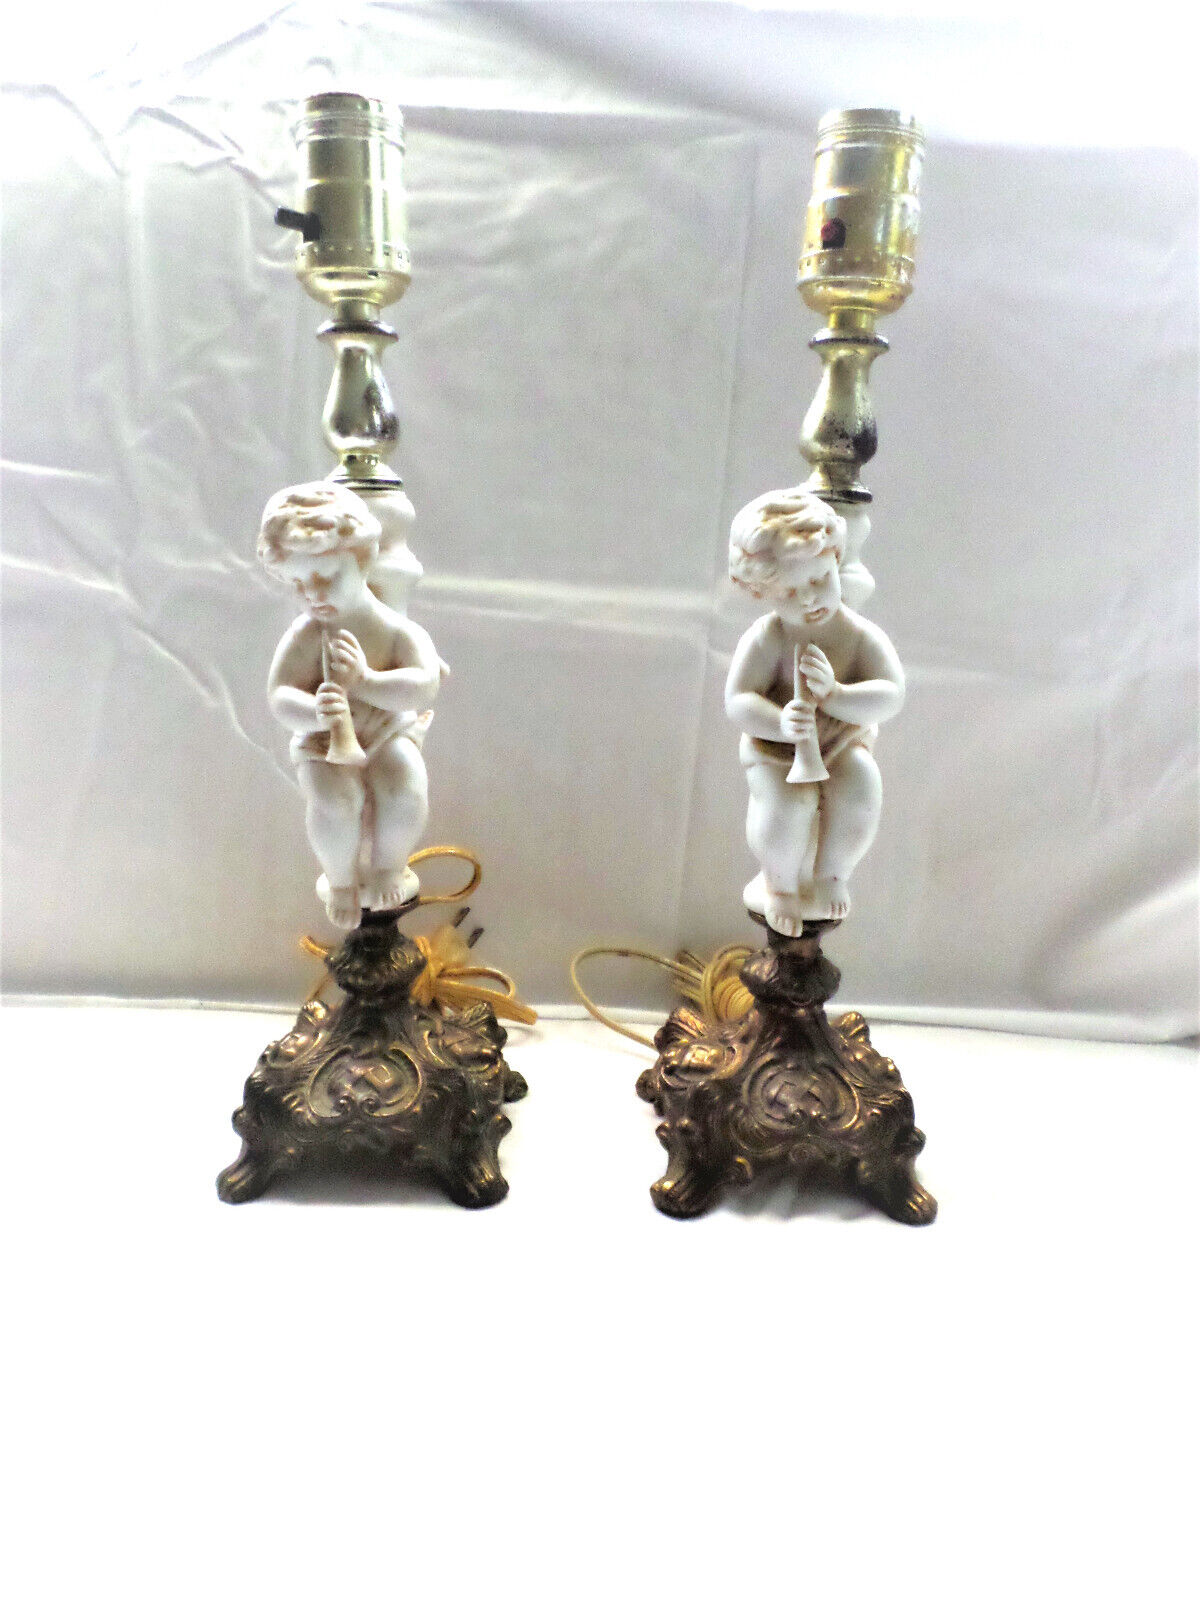 Vintage PAIR Cherub Cupid Angel Lamps Bisque and Ornate Brass